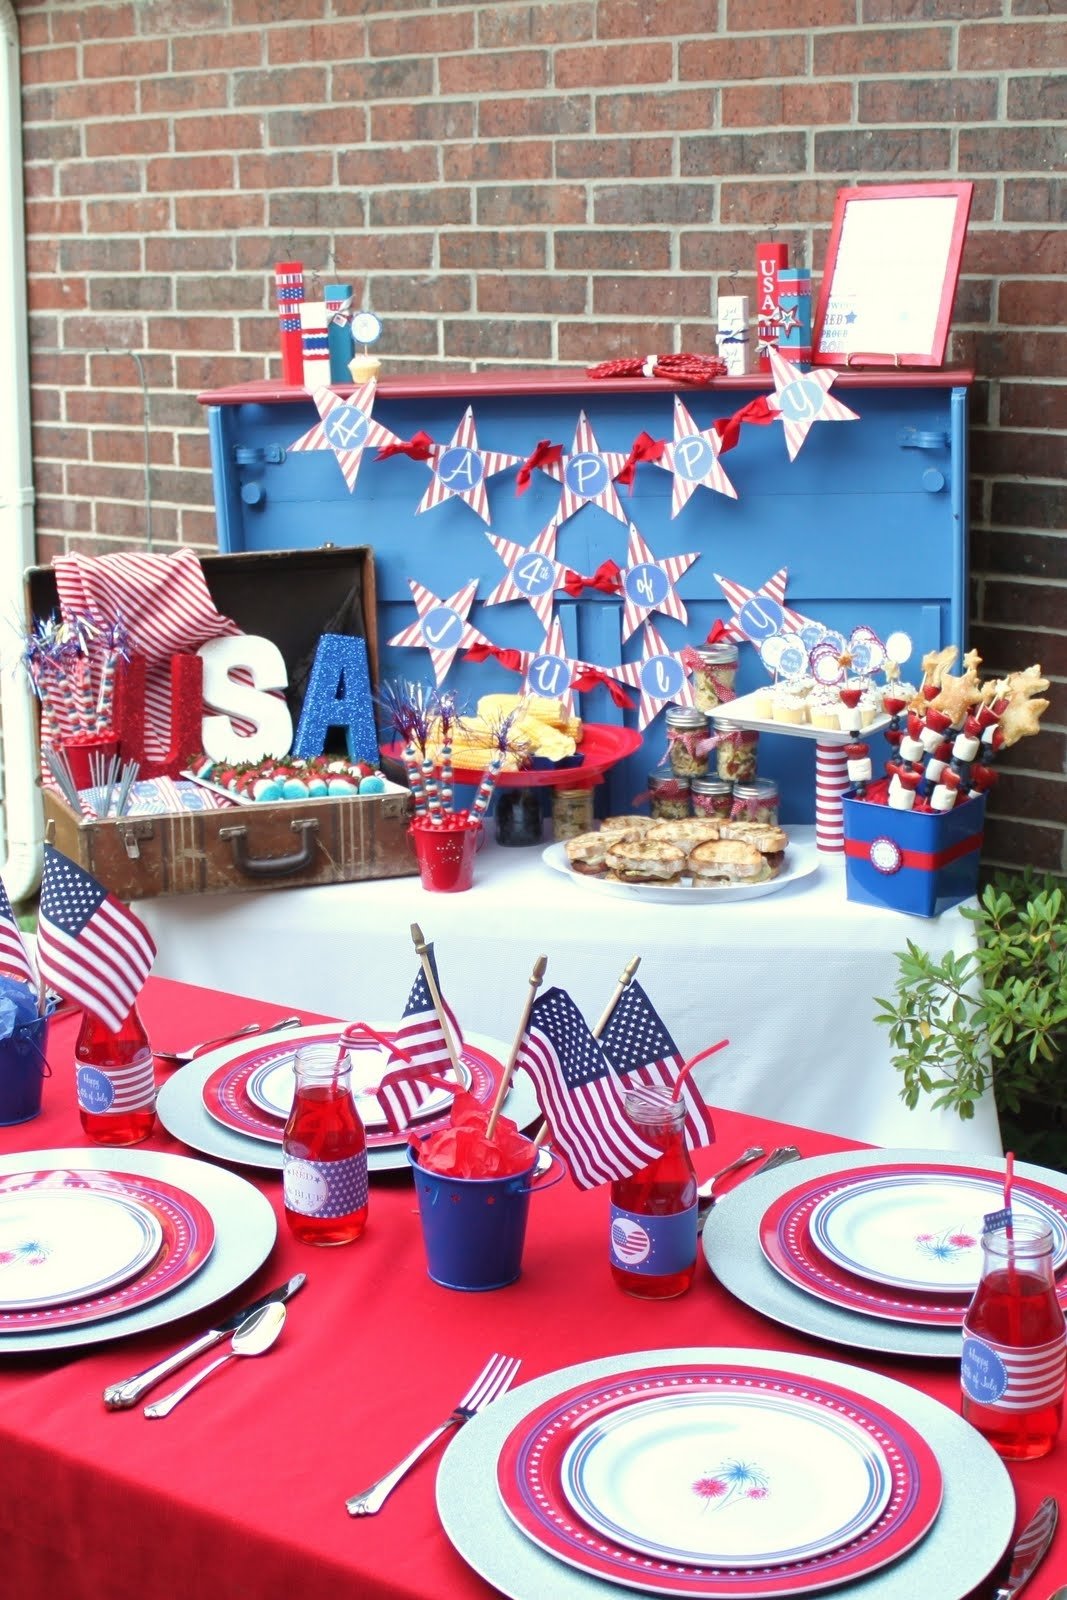 Get Festive with These 4th of July Decor Ideas